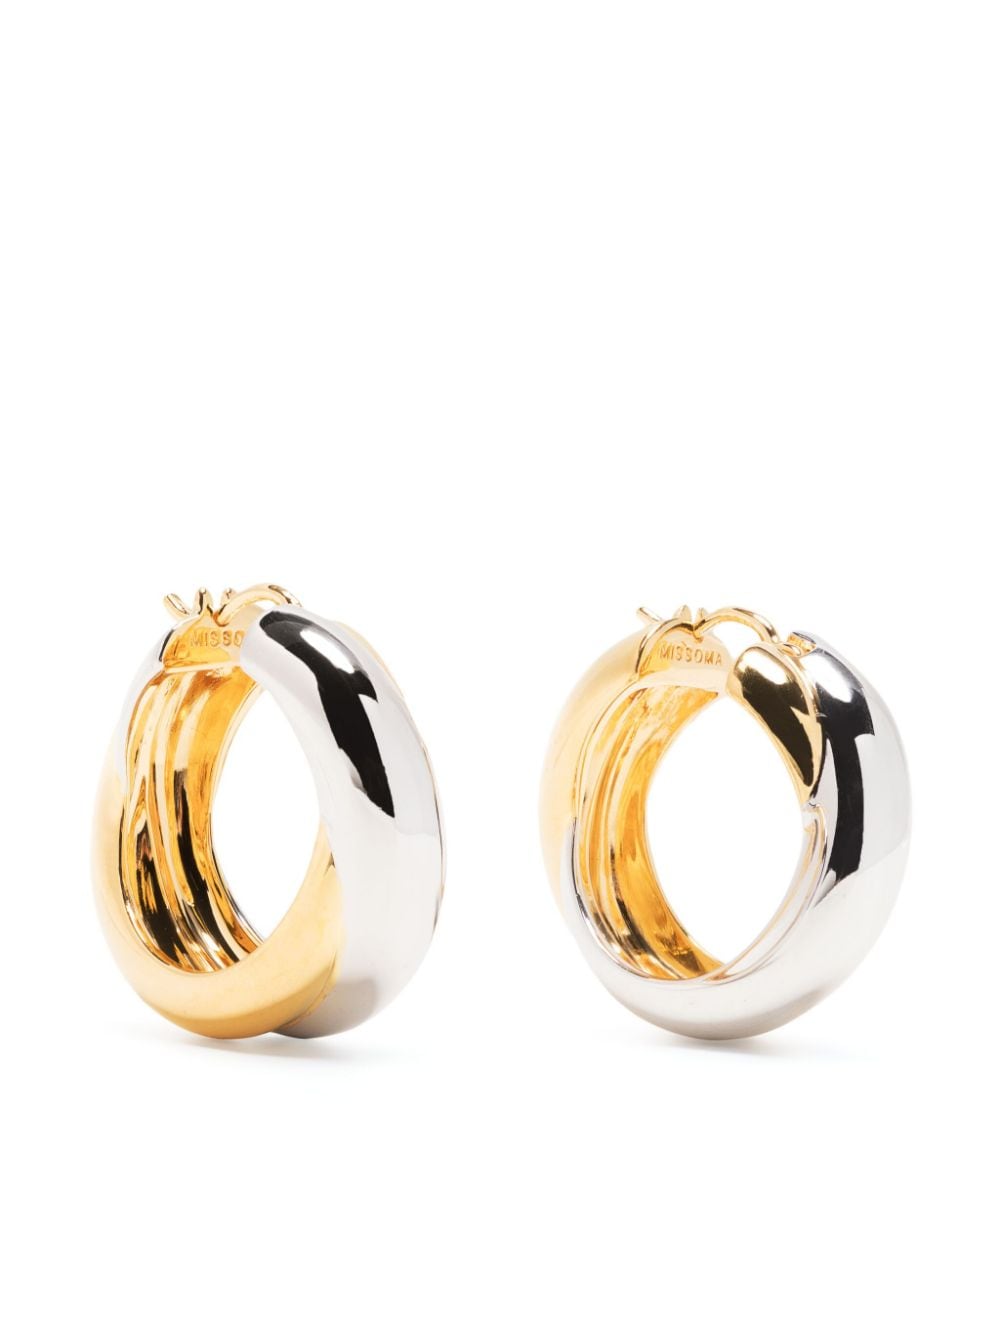 Missoma x Lucy Williams two-tone entwine hoops - Gold von Missoma